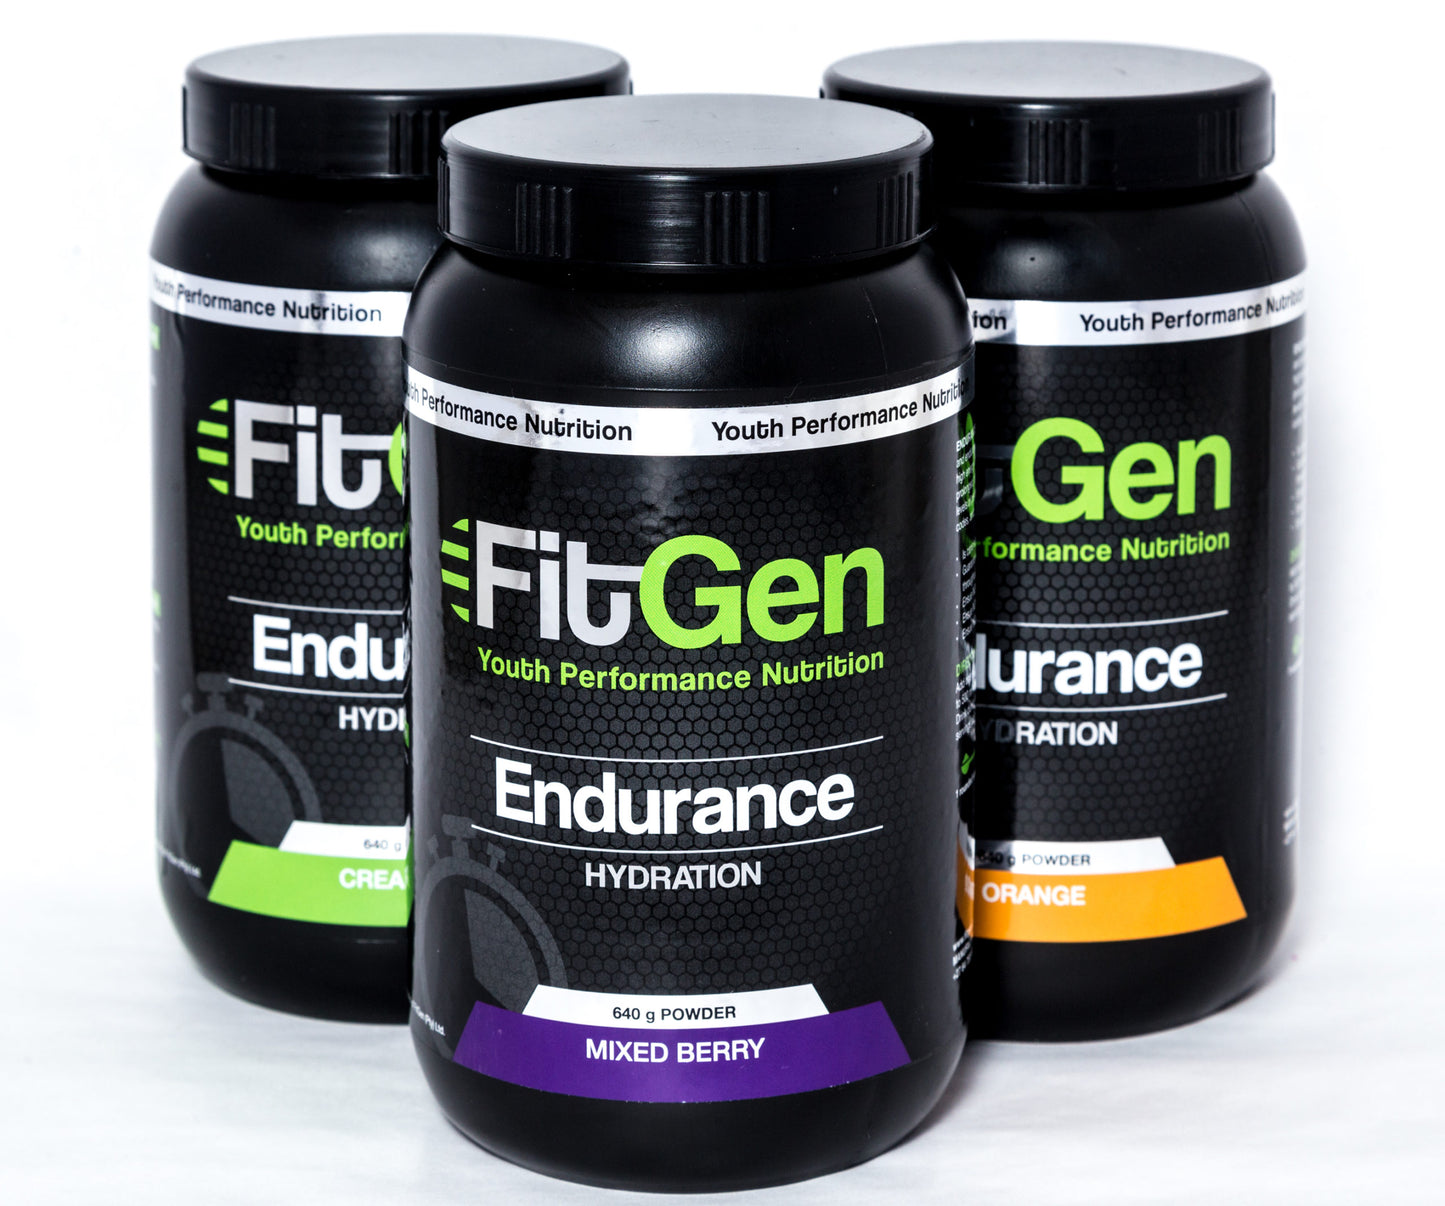 FitGen Endurance Energy Drink: Variety of Flavours